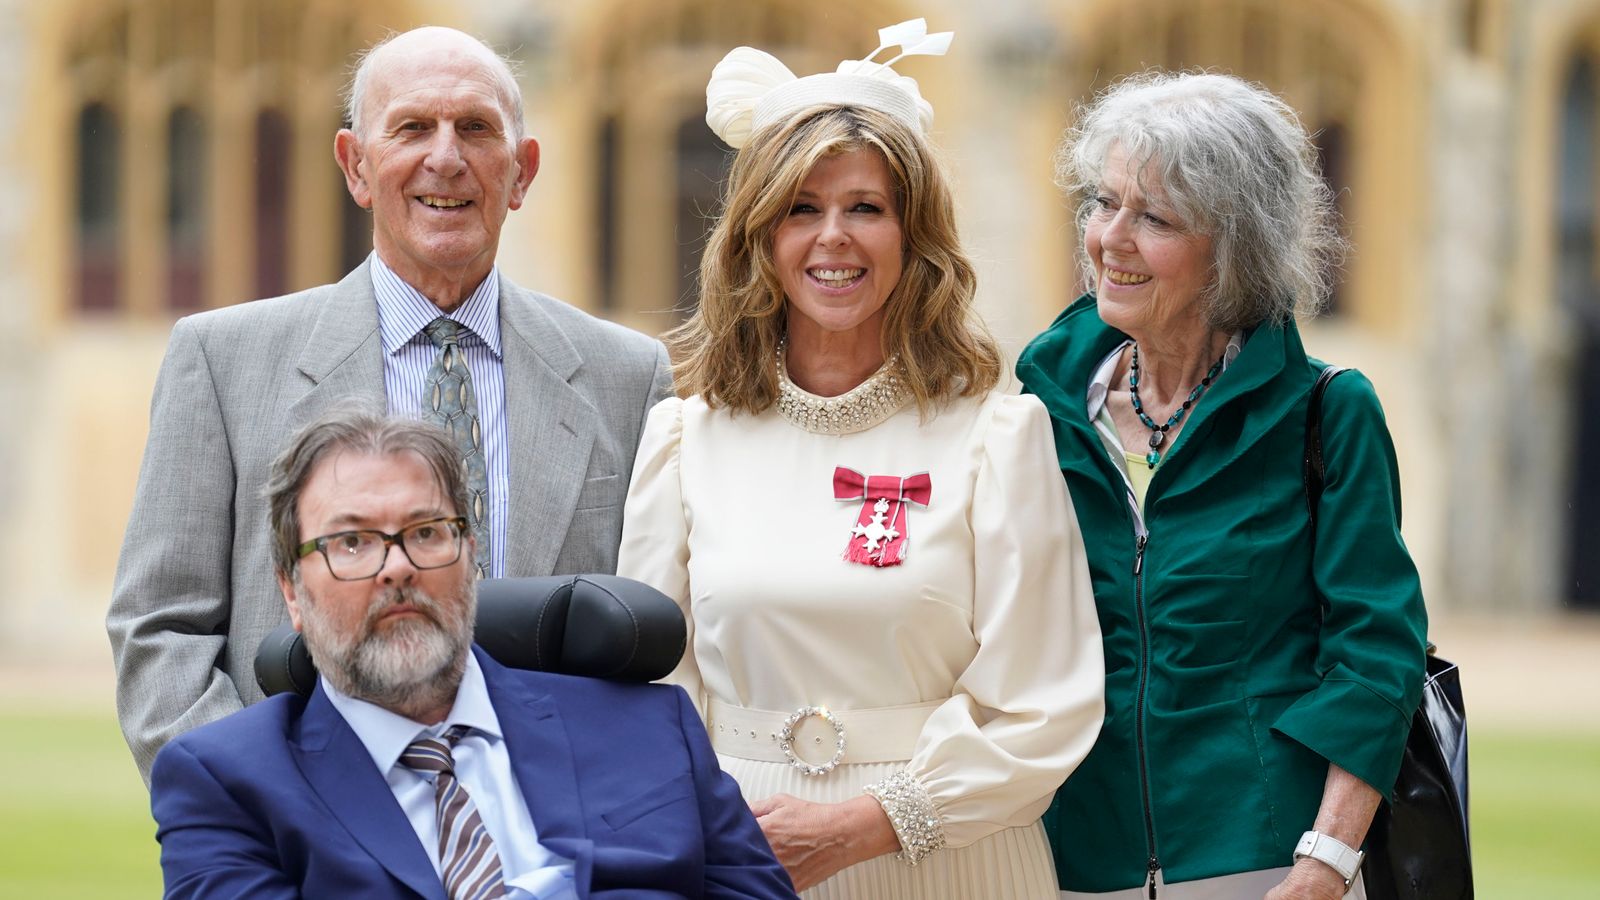 Kate Garraway joined by husband Derek Draper as she collects MBE from Prince William